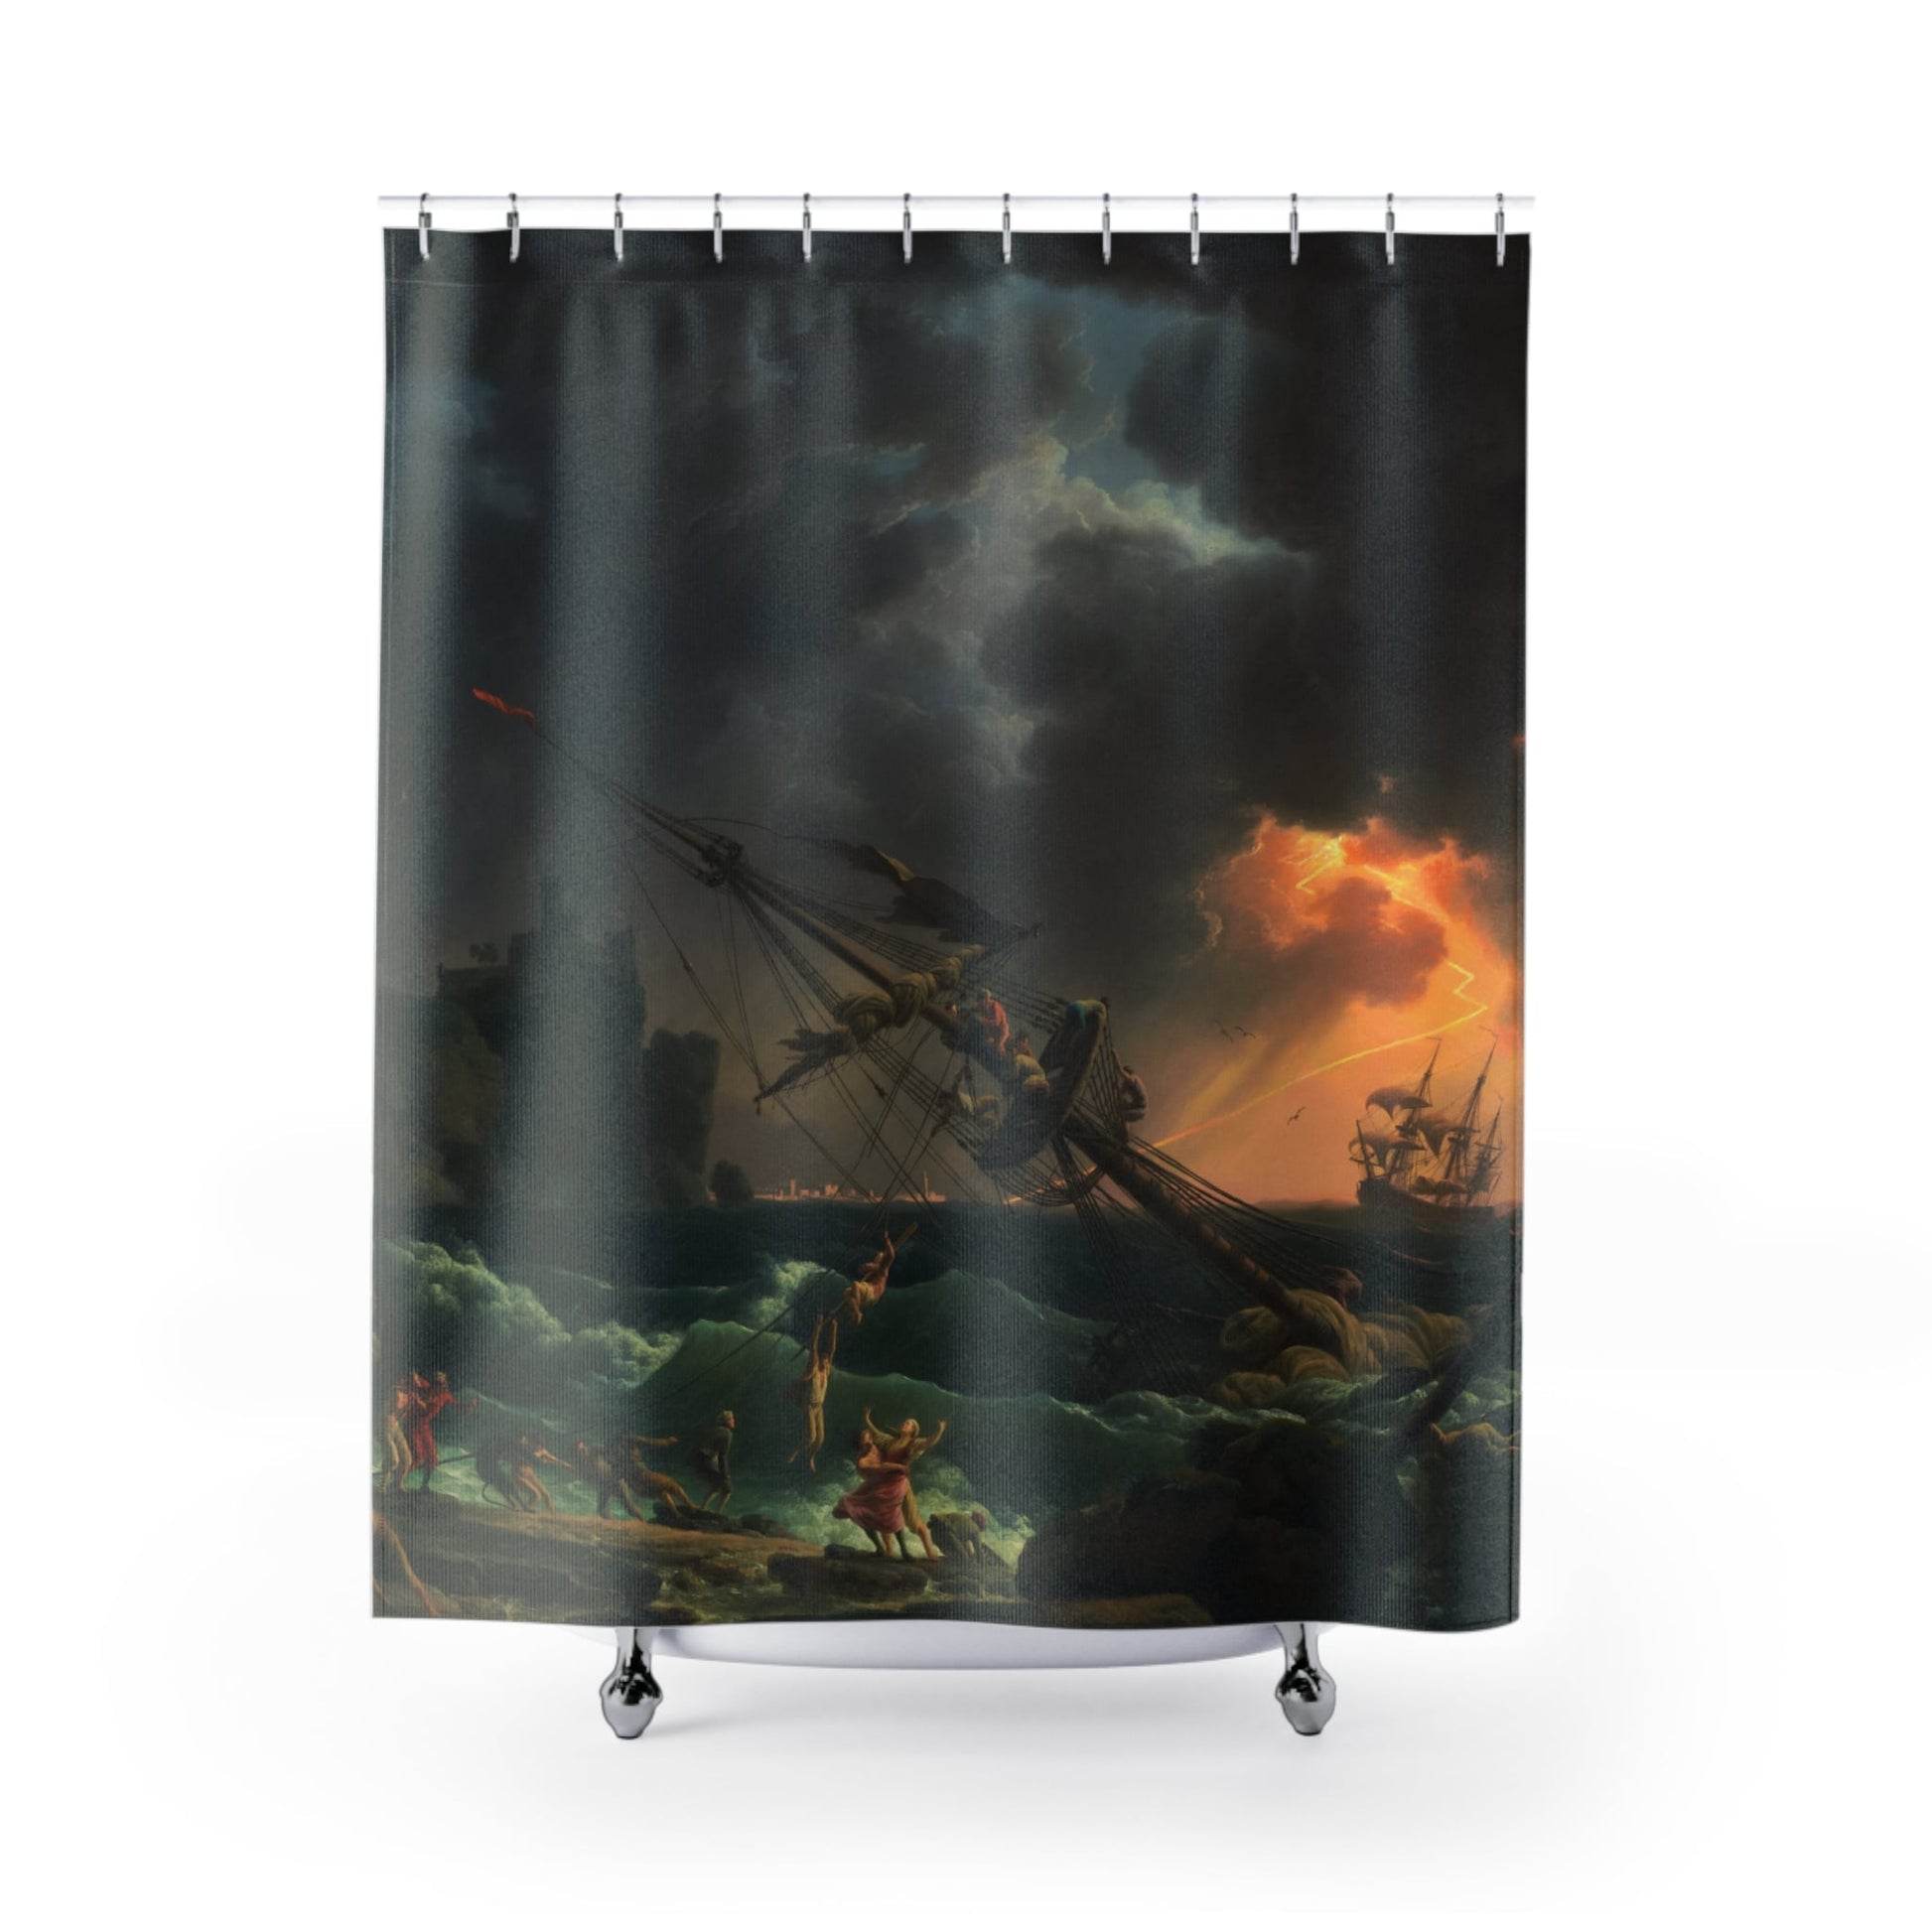 Antique Sea Painting Shower Curtain with shipwreck design, dramatic bathroom decor featuring historical sea art.